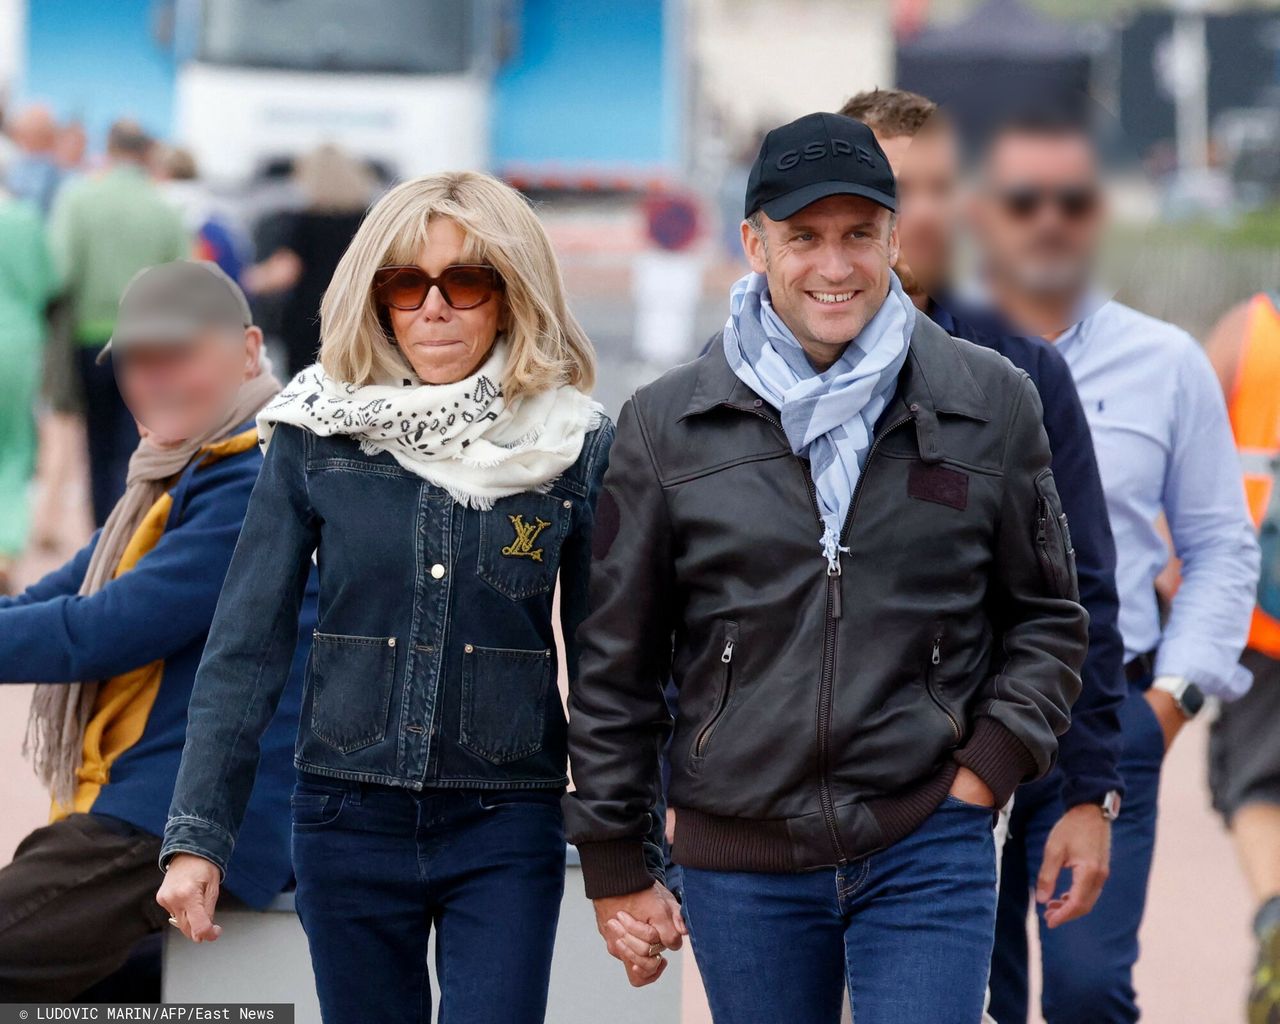 Brigitte Macron with her husband in unusual attire at airshows